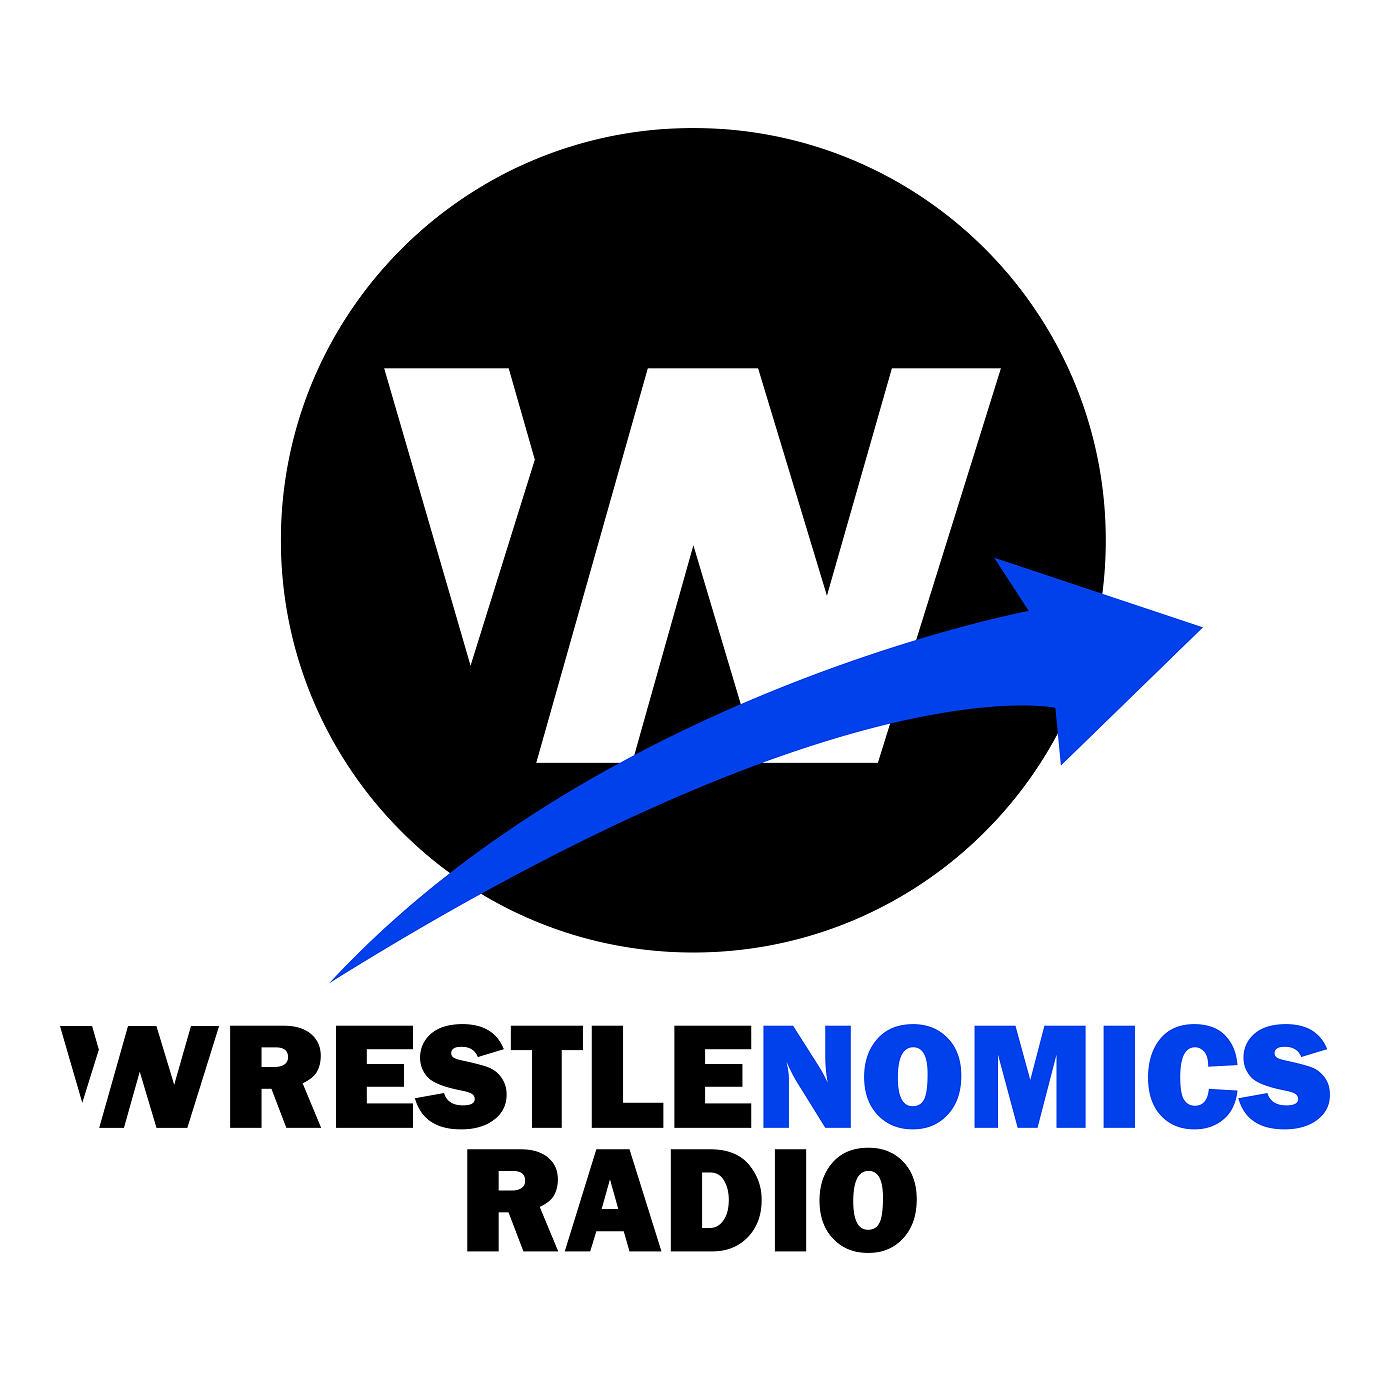 63: Wrestlenomics Radio: Neville out of WWE contract, tracking indie stars, WWE Studios president leaves